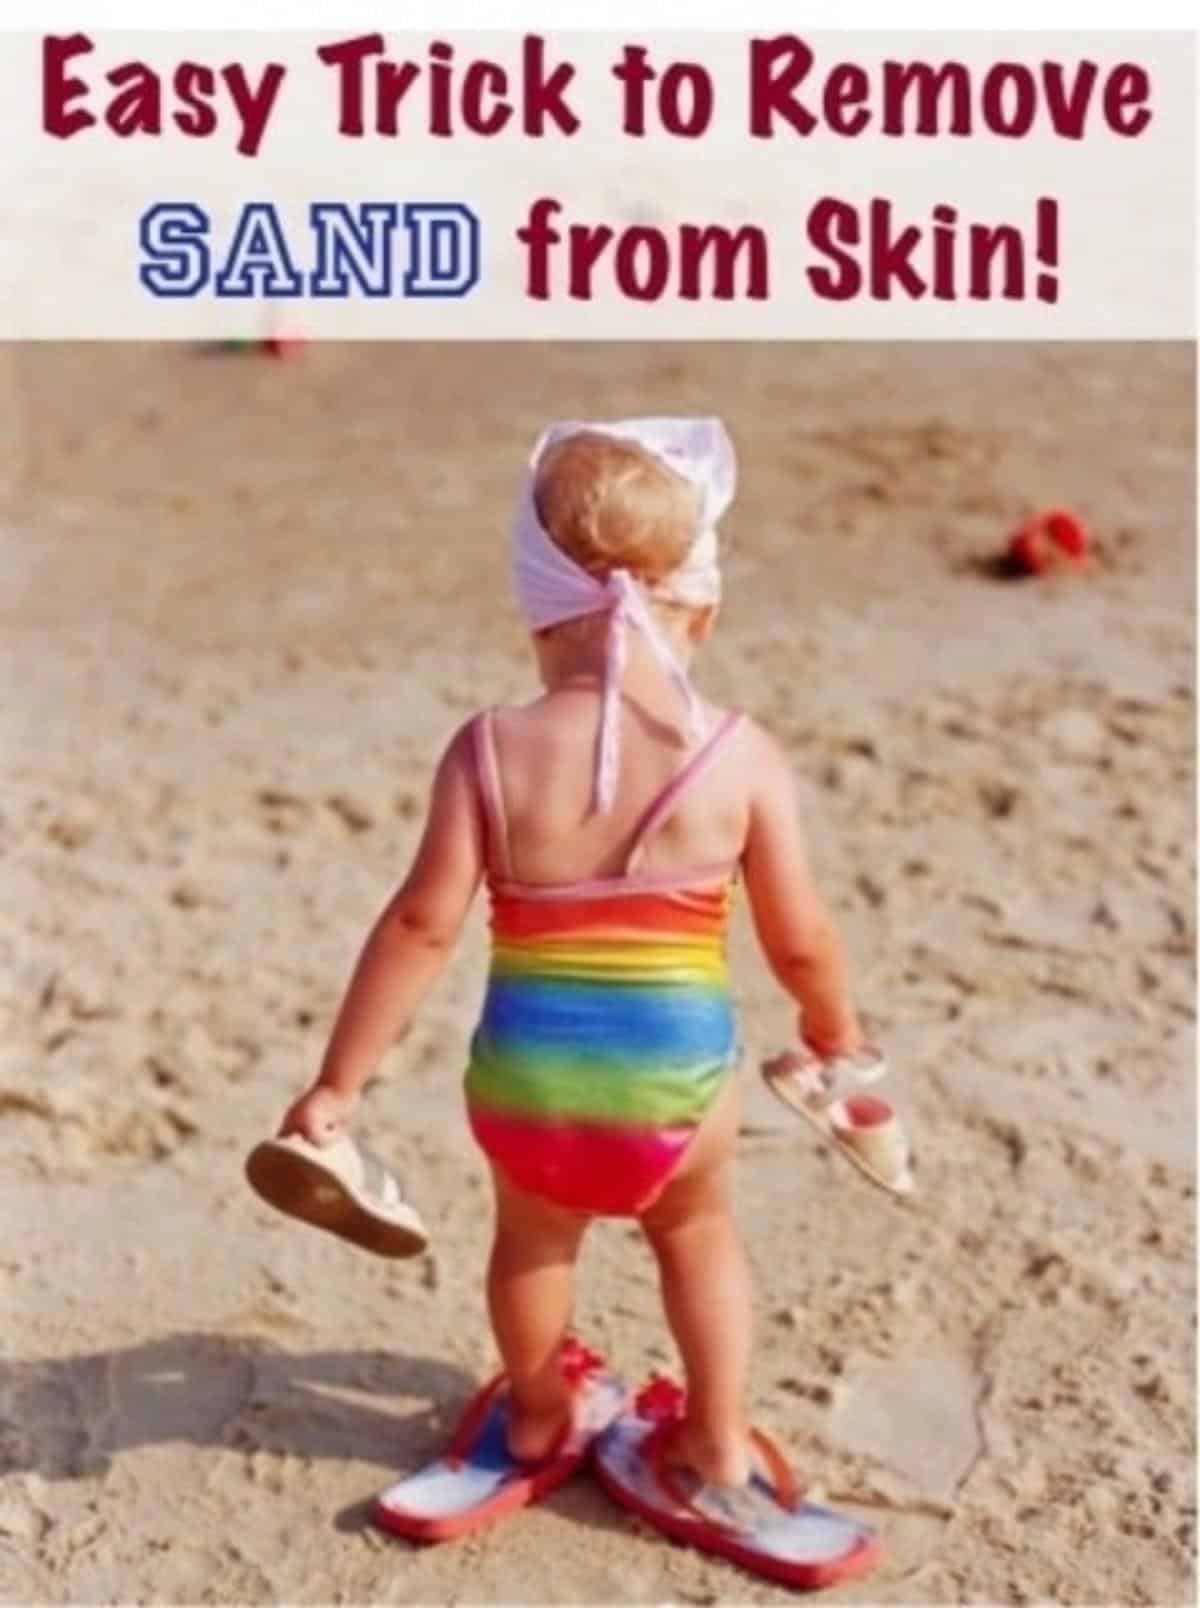 DIY Trick to Remove Sand from Skin poster.